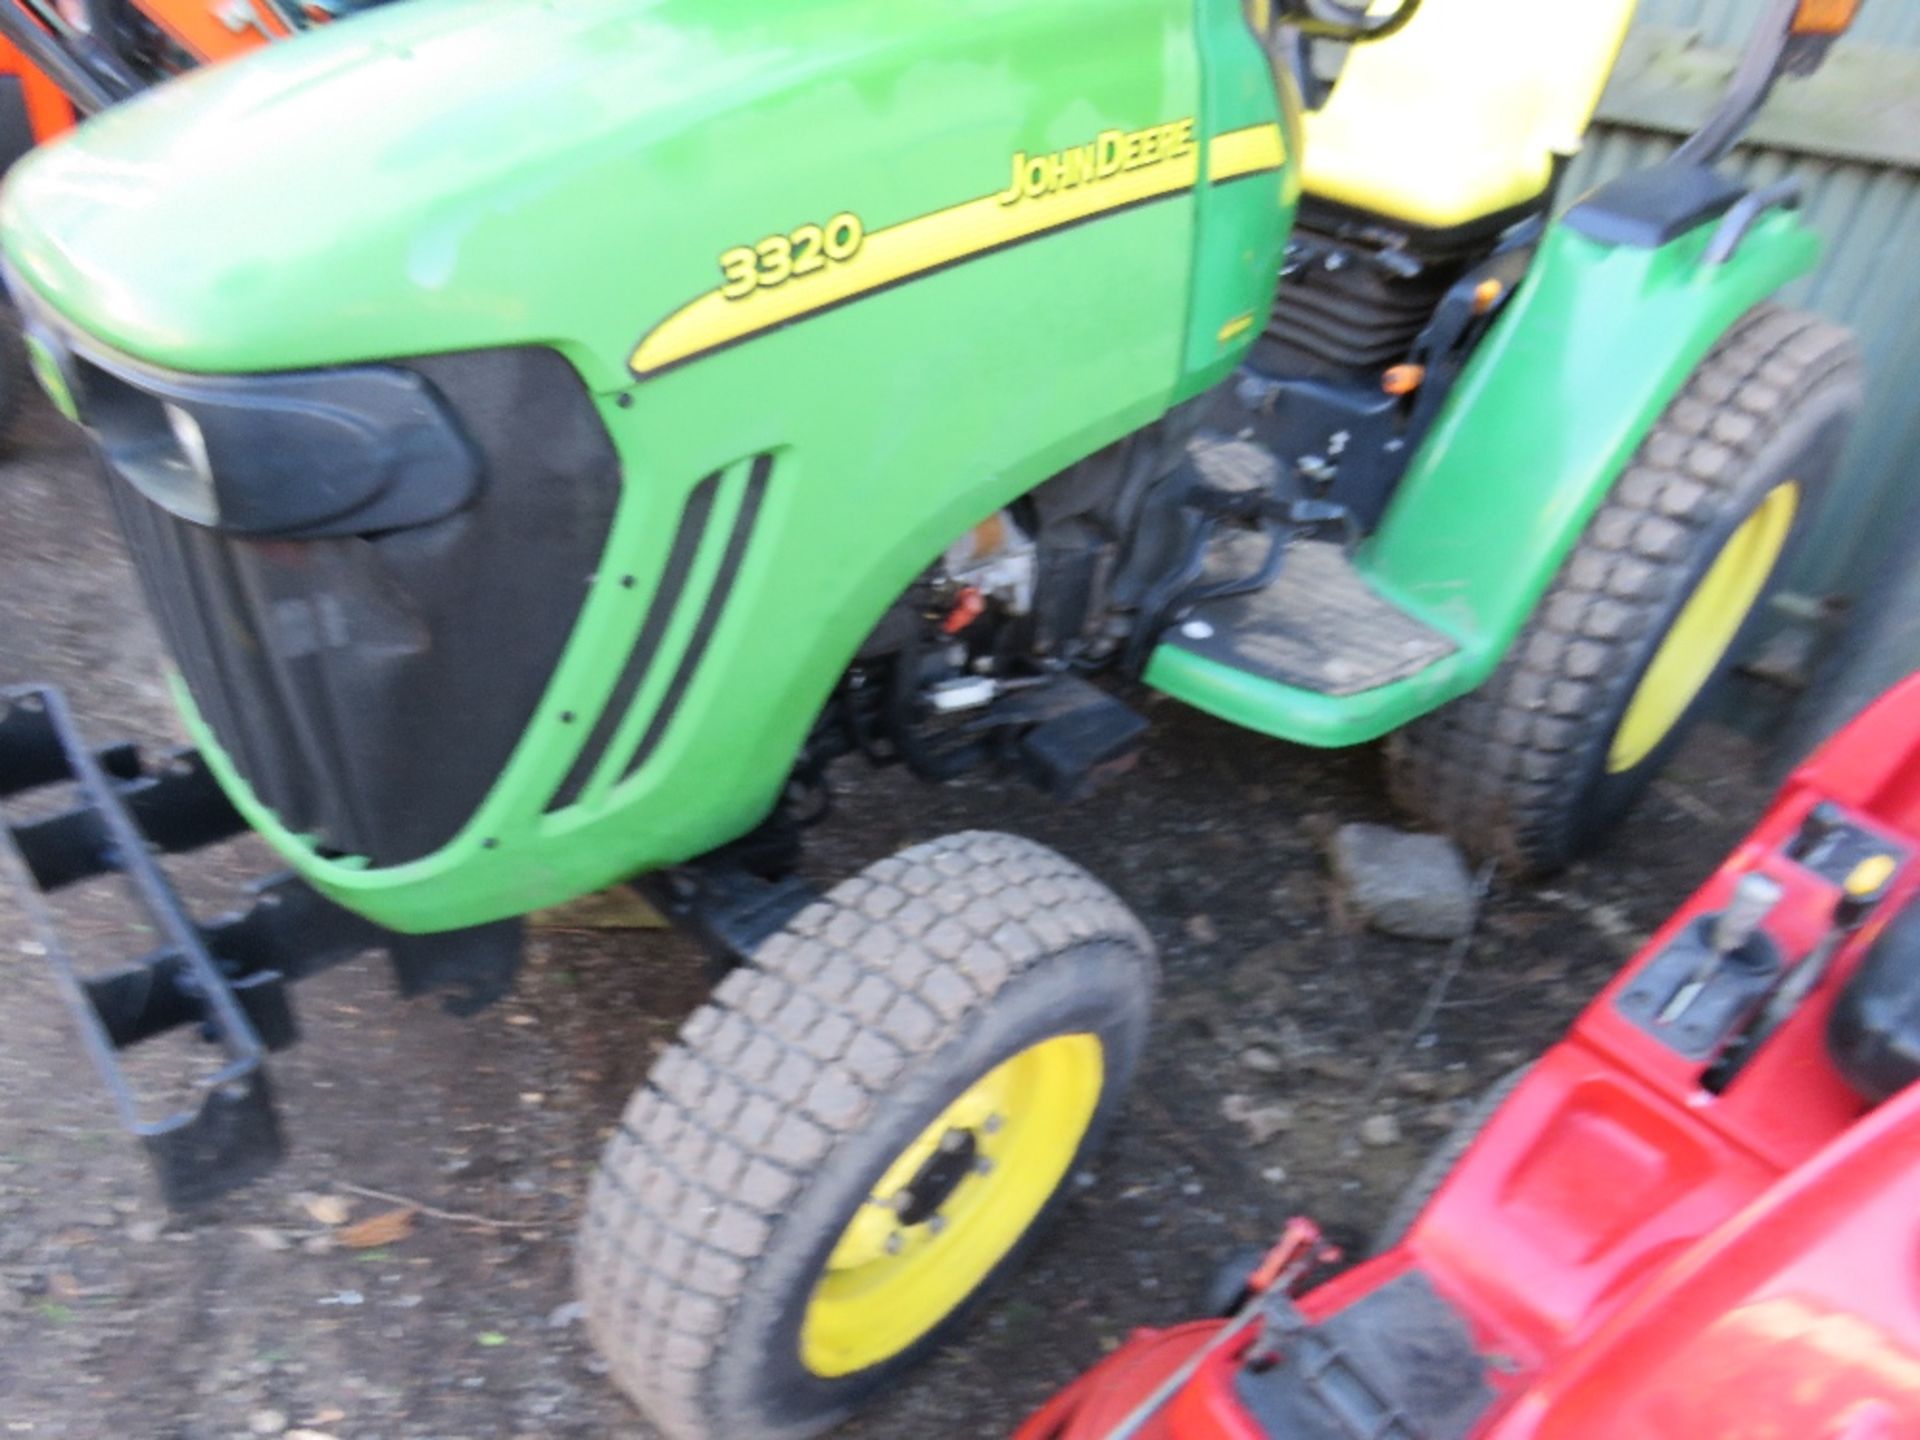 JOHN DEERE 3320 4WD COMPACT TRACTOR, YEAR 2006 REGISTERED, ENGINE NEEDS ATTENTION. REG:YJ06 WVT - Image 4 of 8